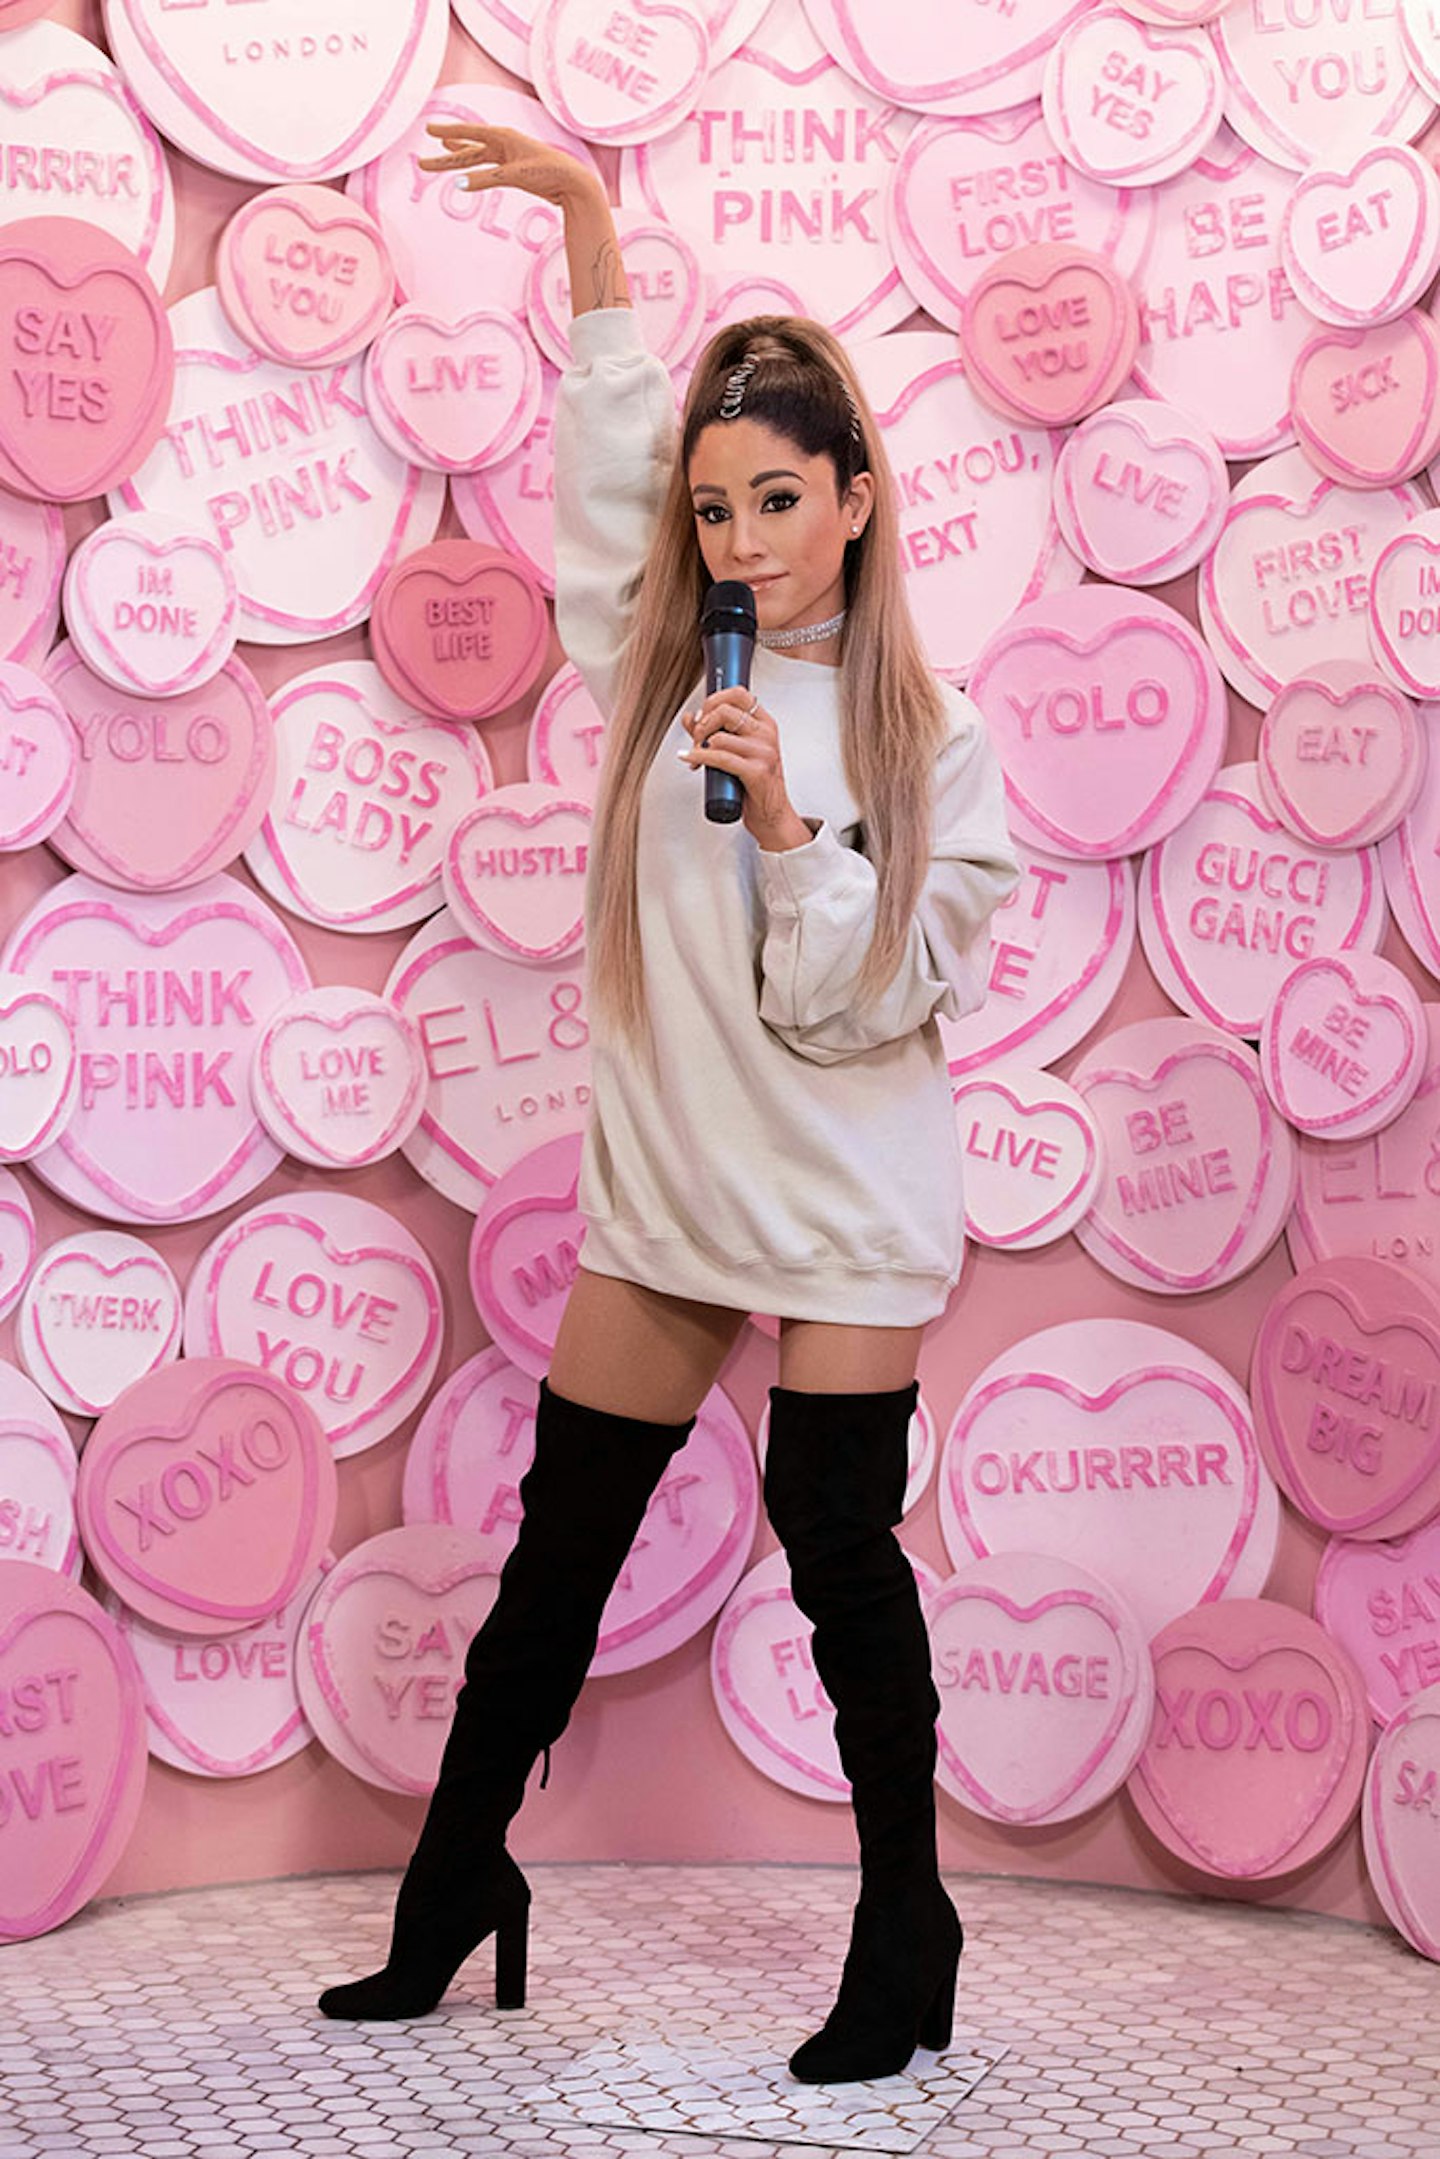 Ariana Grande: Facts you never knew about the 'positions' star